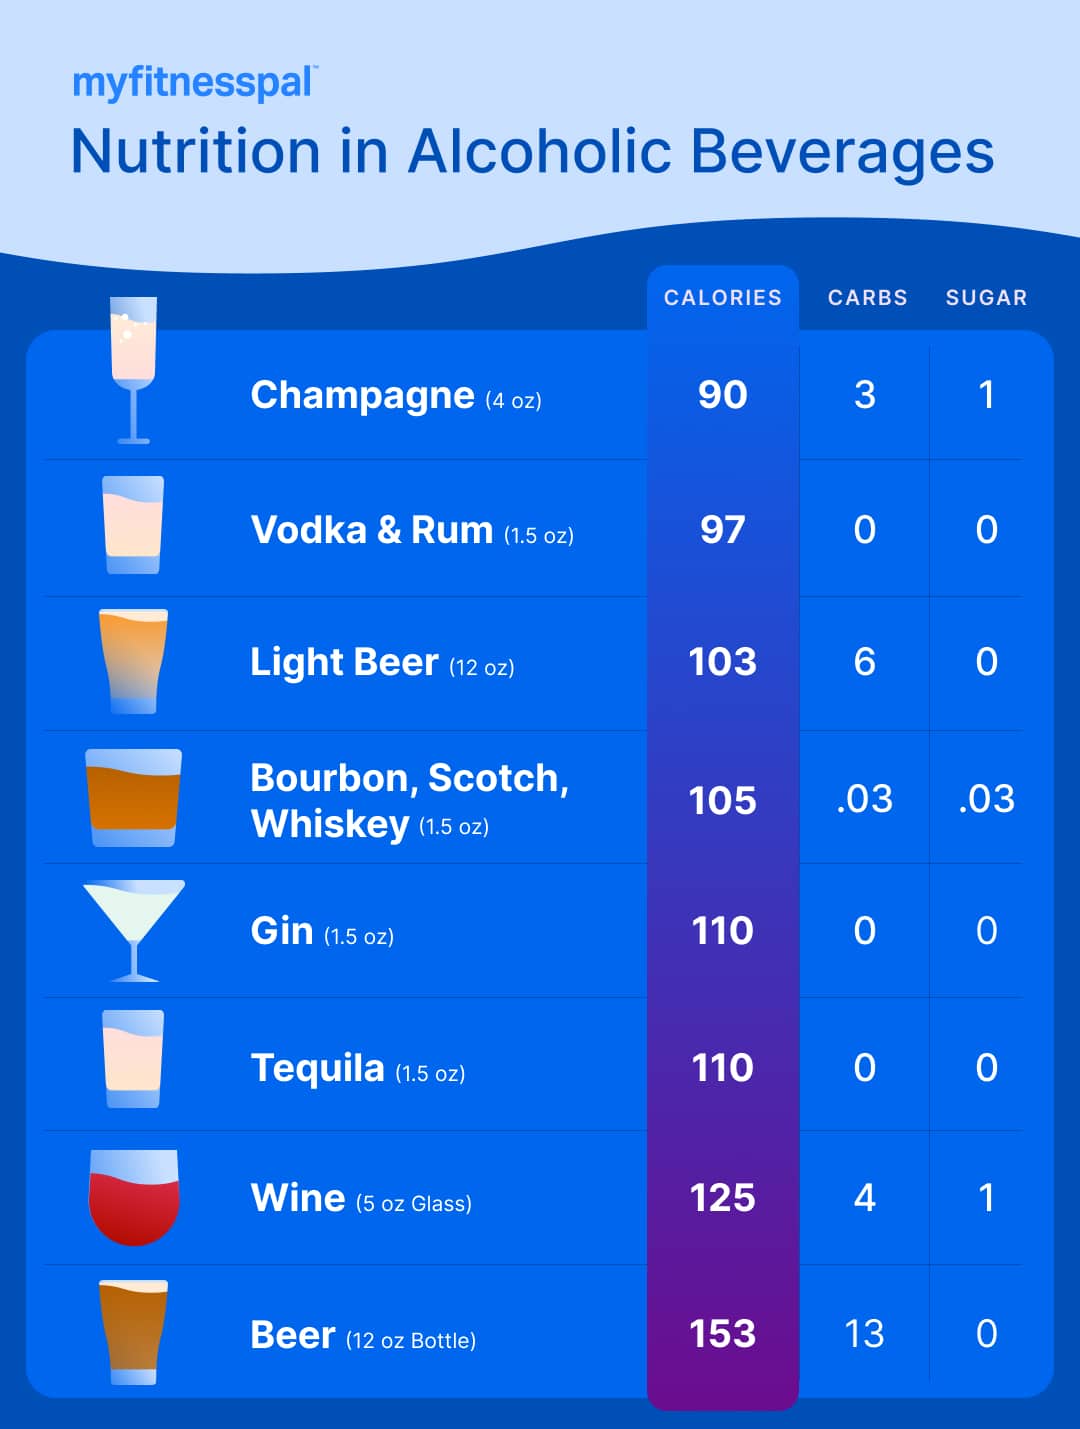 What Alcoholic Beverages Are Healthiest